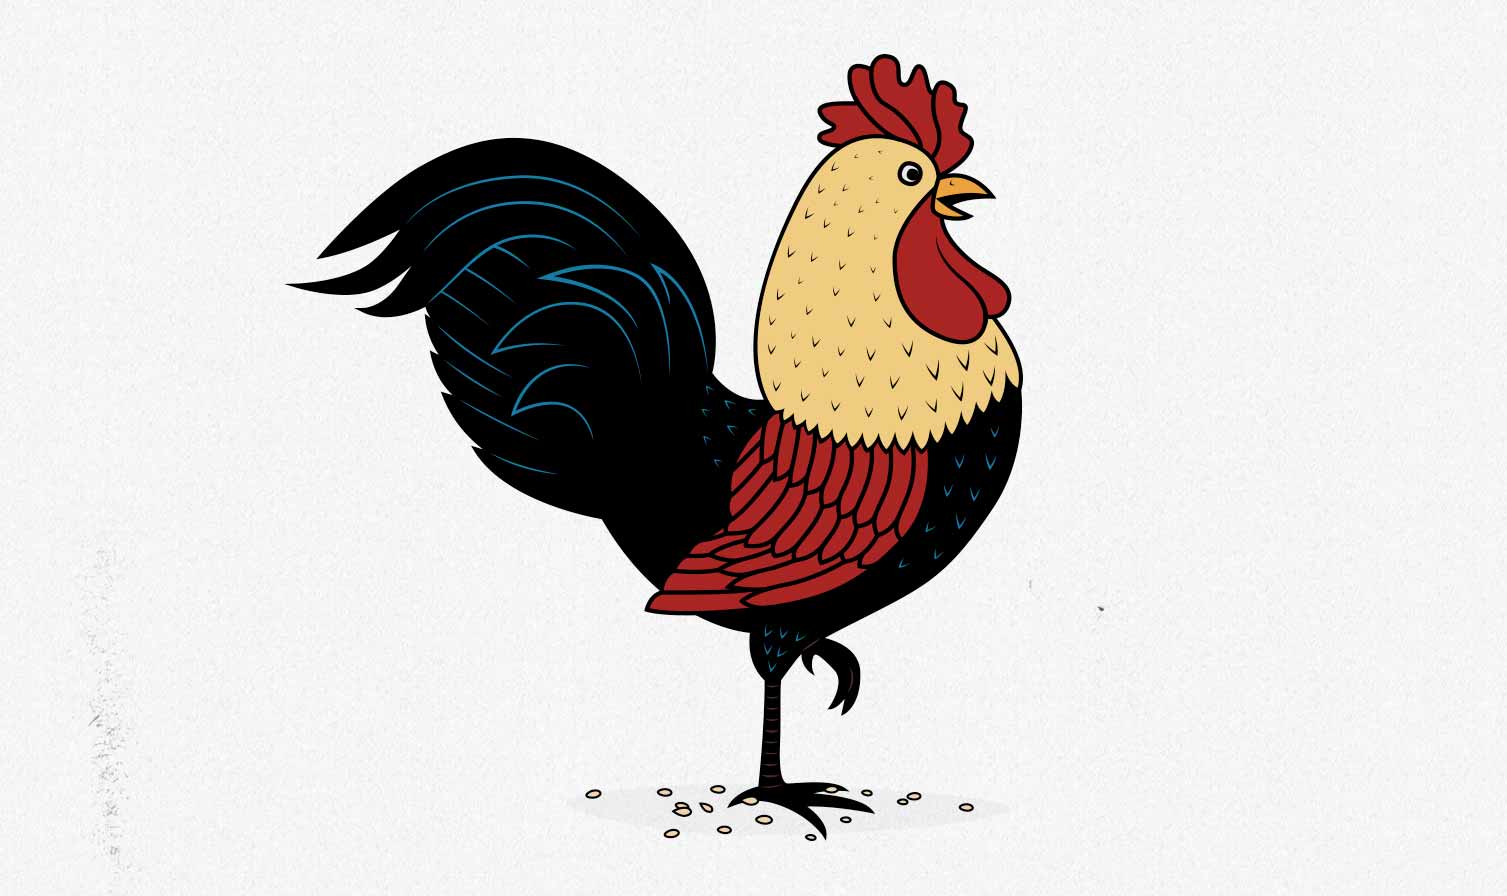 Illustration of a chicken, a great source of protein while bulking.